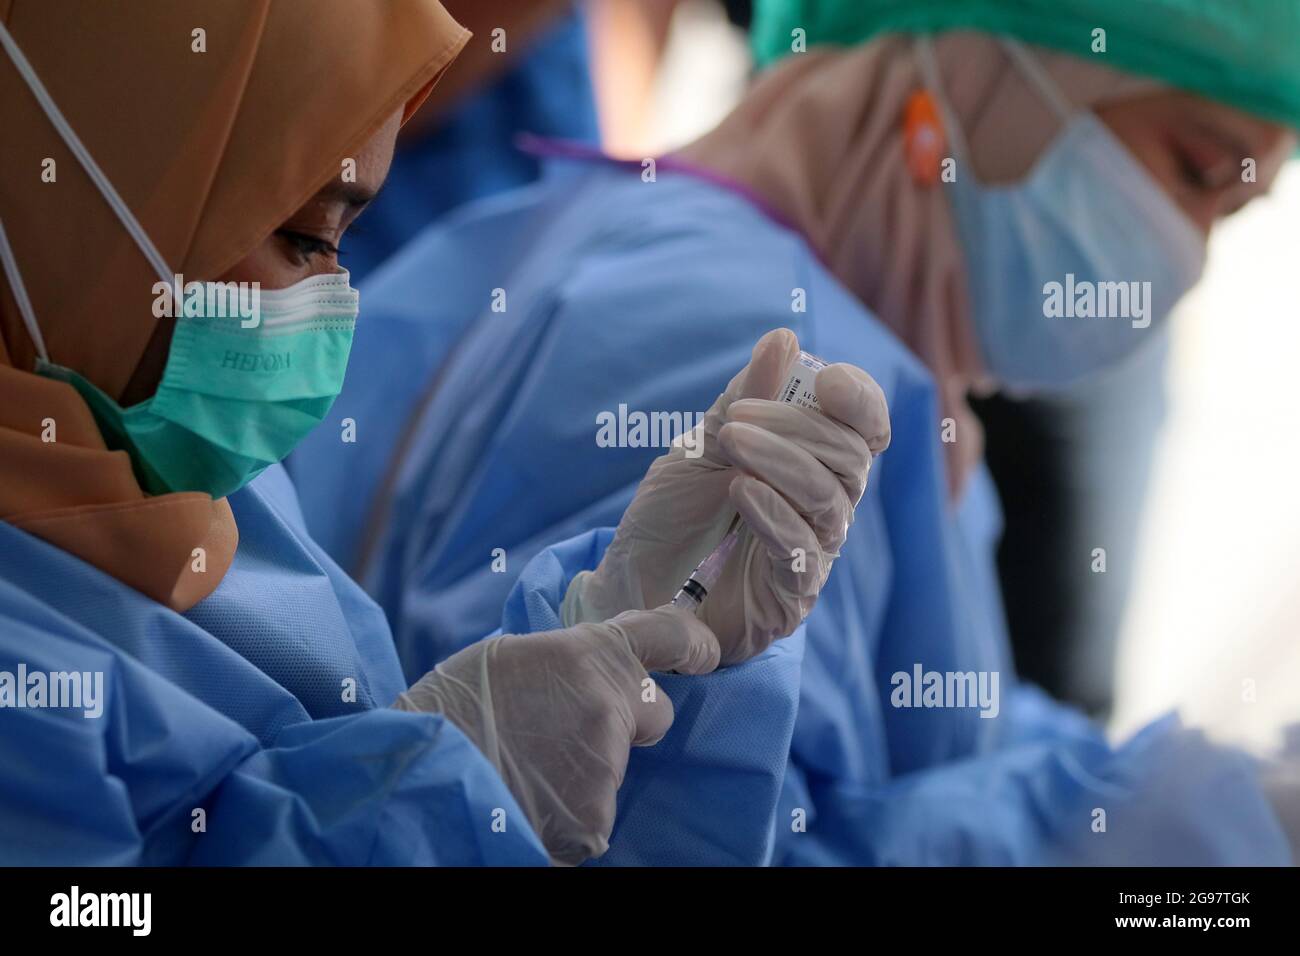 Sidoarjo, Indonesia. 24th July, 2021. A health worker prepares a dose of the Sinovac Covid-19 vaccine for Laborer in Sidoarjo, East Java, Indonesia, on July 24, 2021. (Photo by Boy Slamet/INA Photo Agency/Sipa USA) Credit: Sipa USA/Alamy Live News Stock Photo